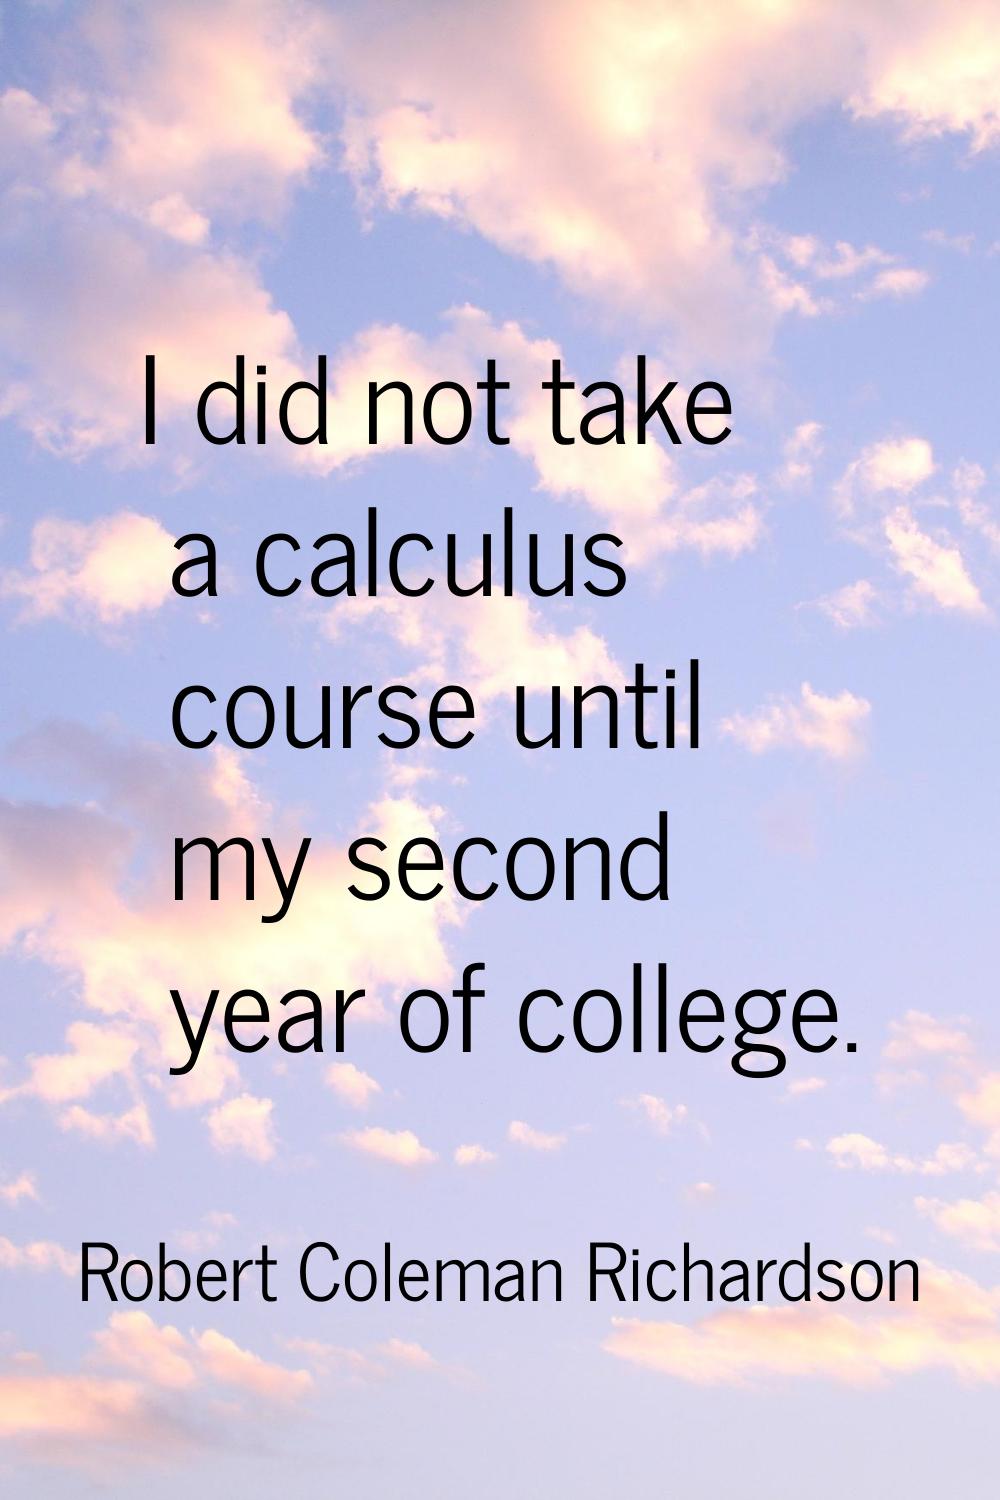 I did not take a calculus course until my second year of college.